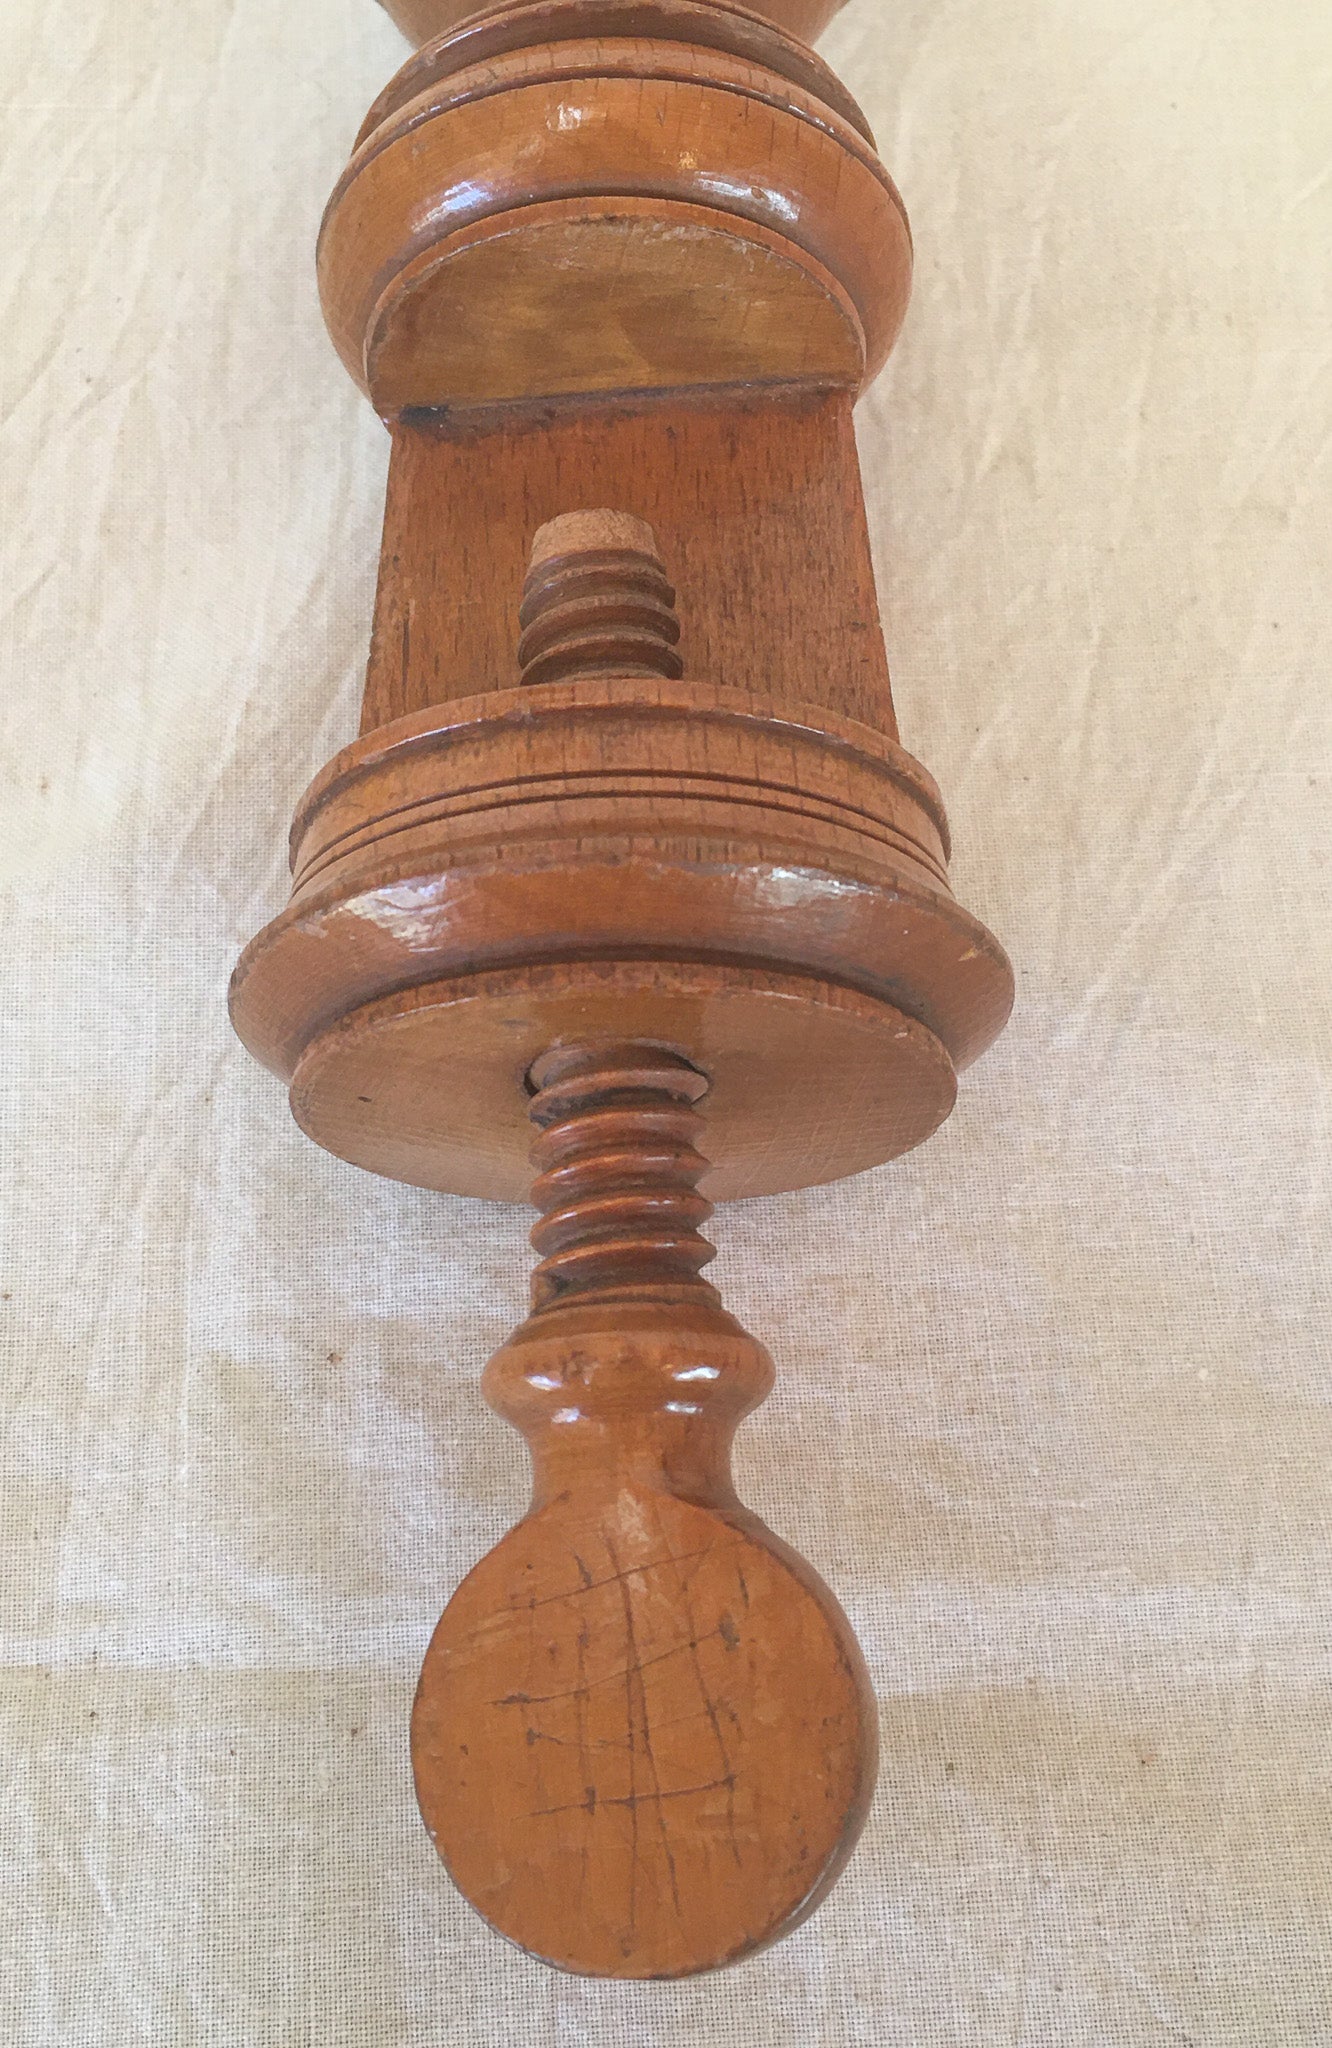 Antique Wooden Sewing Clamp